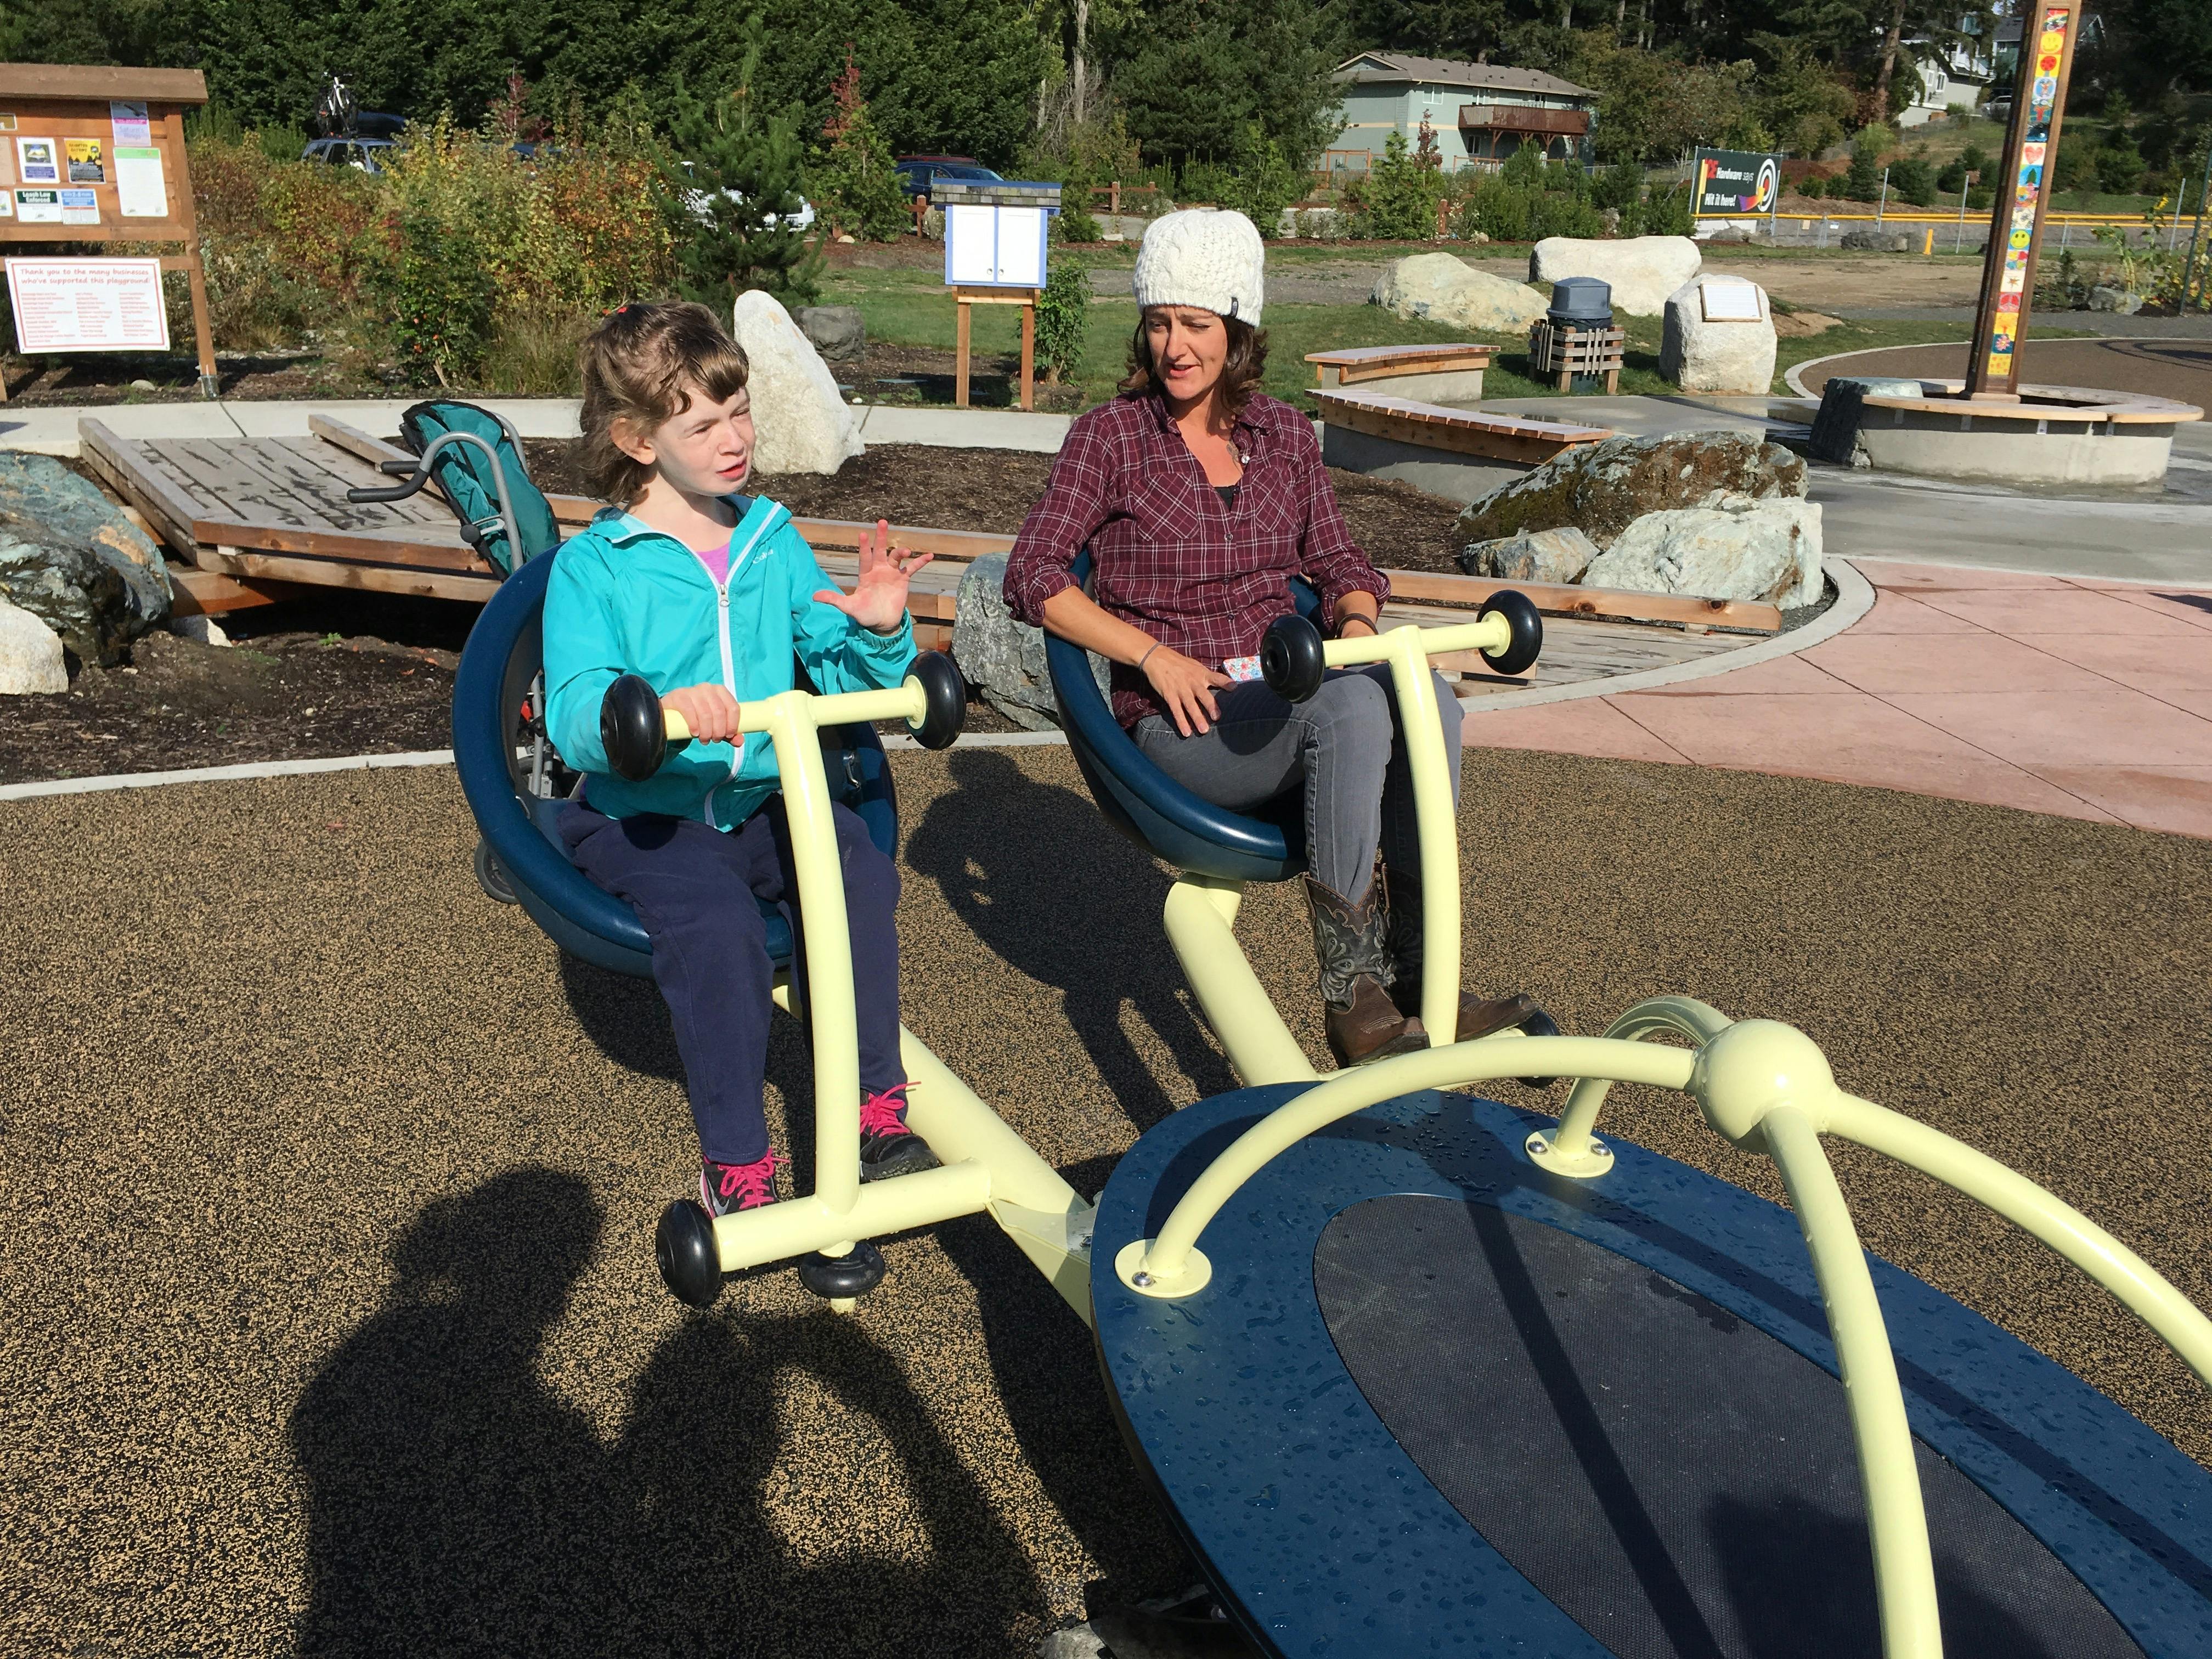 Equipment is designed to encourage all ages and abilities to play together.